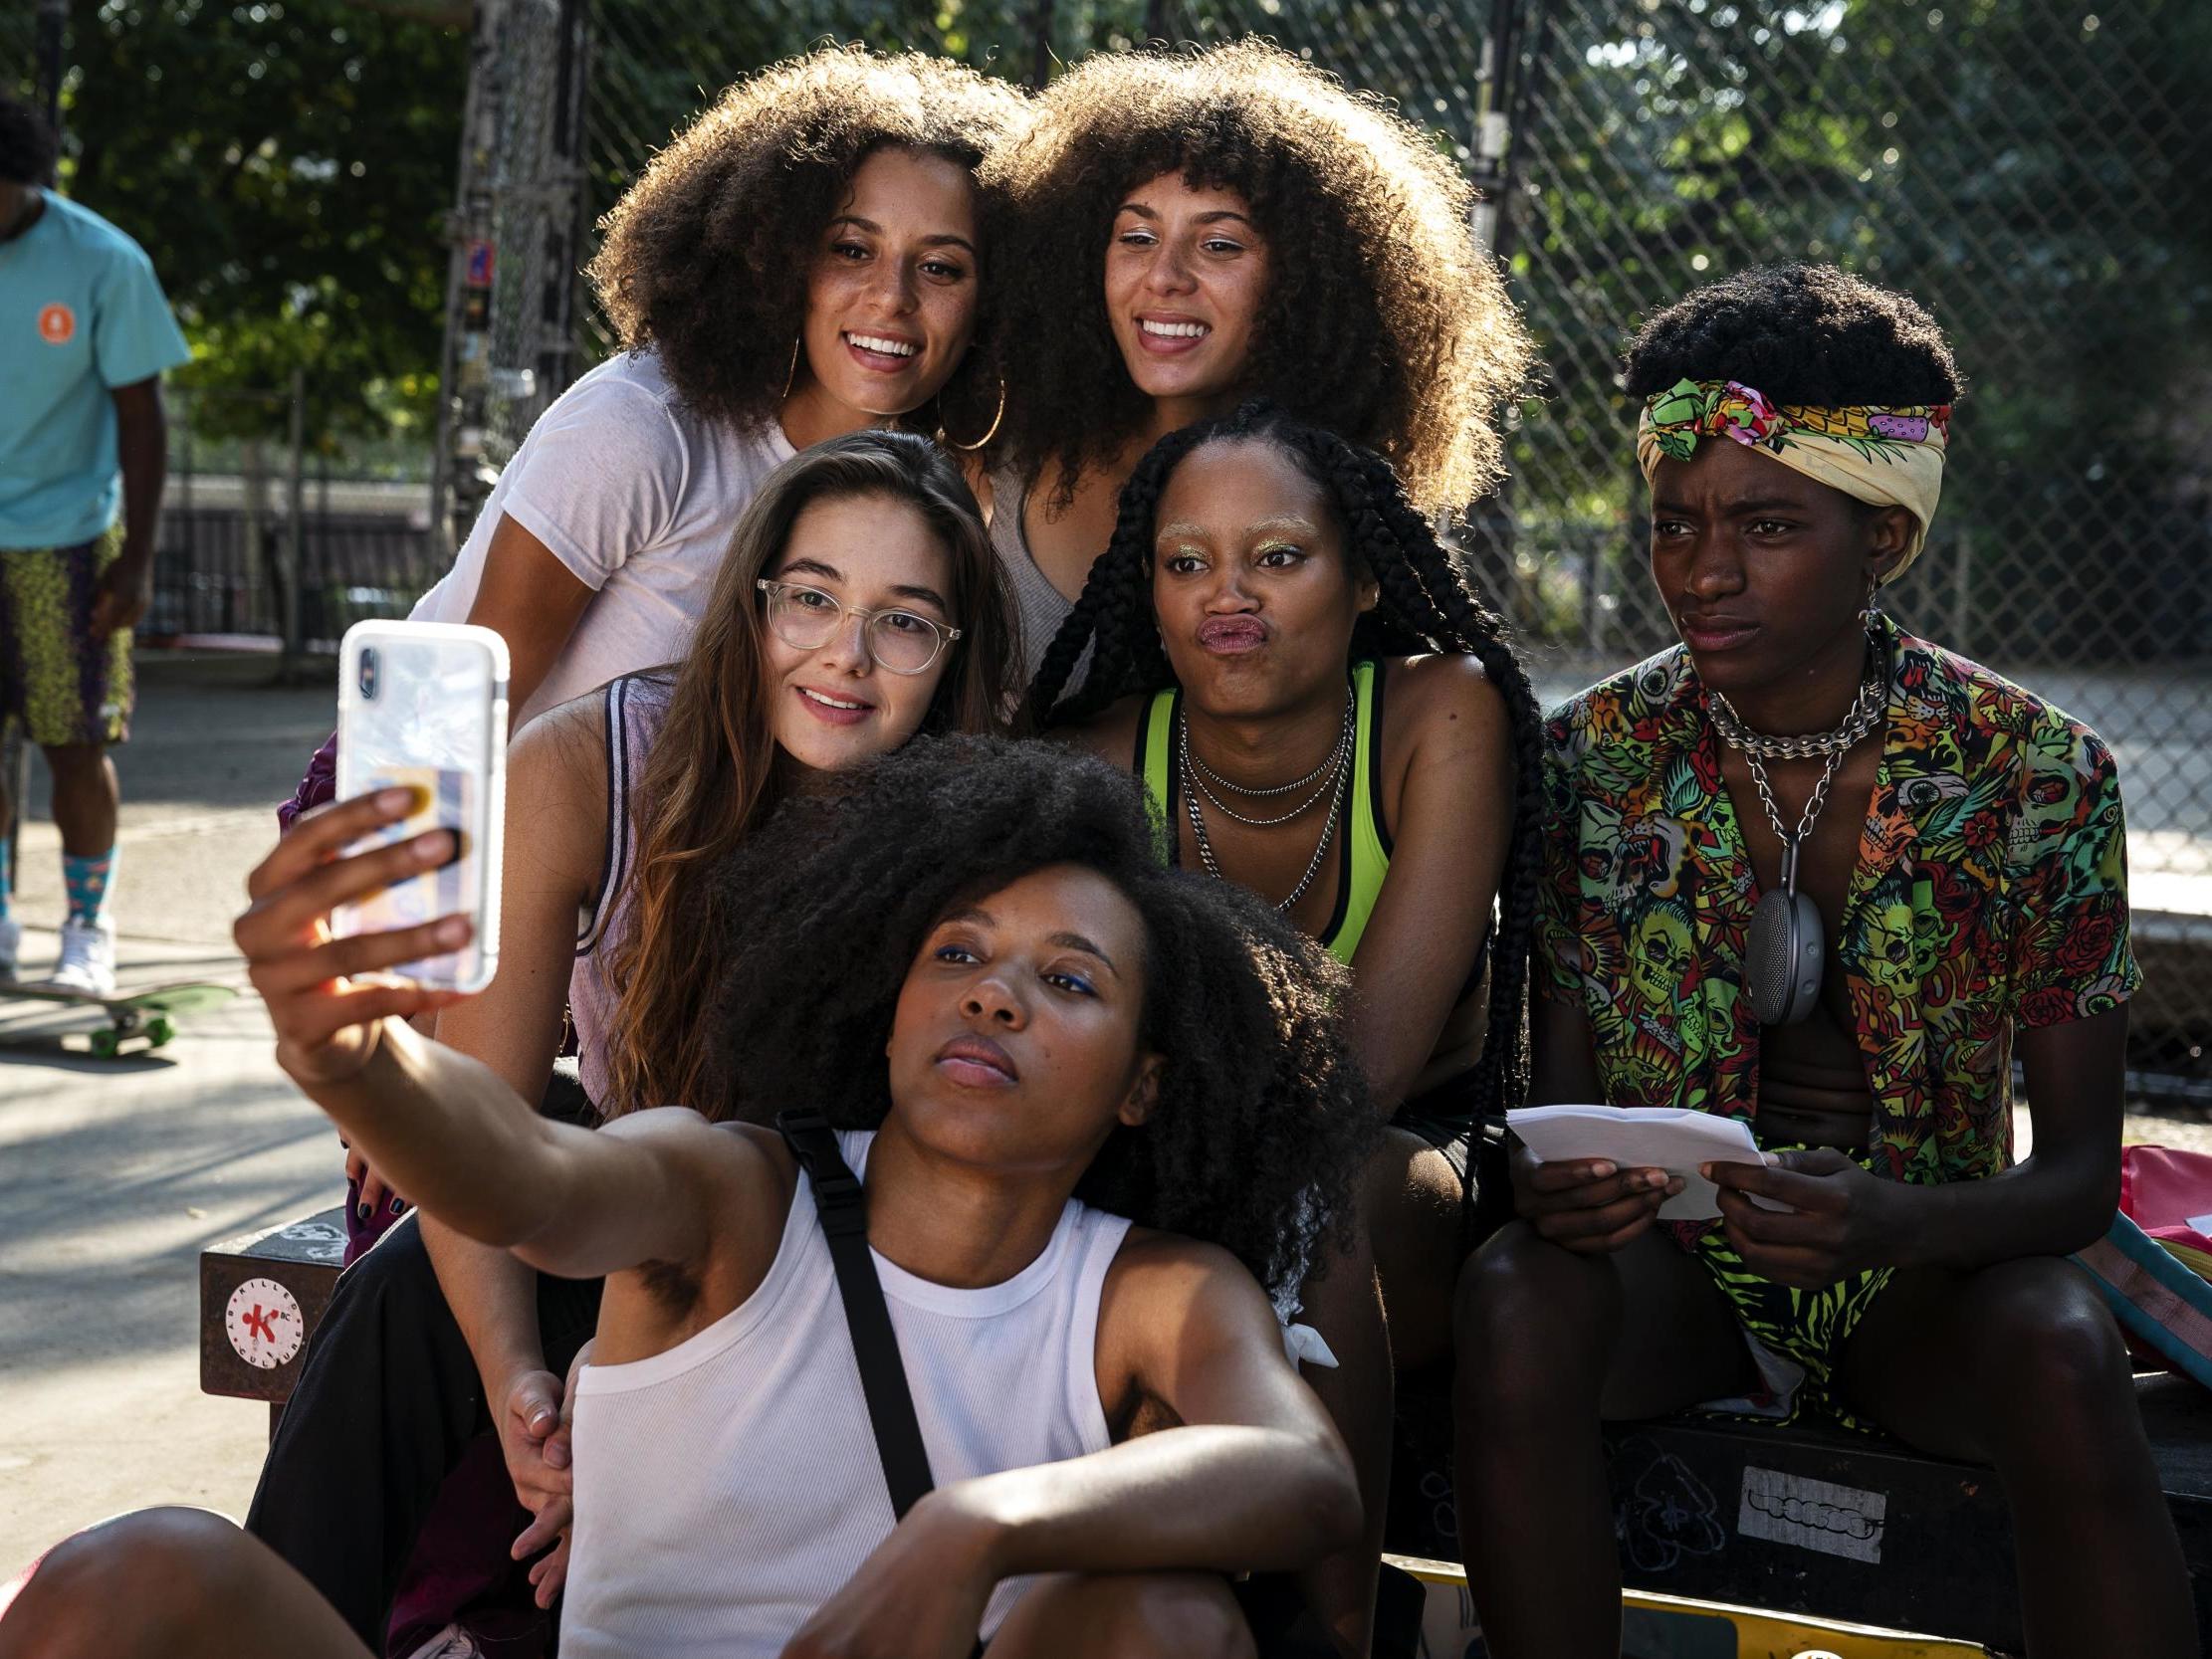 The skateboarders of ‘Betty’ pose for a selfie (Sky)